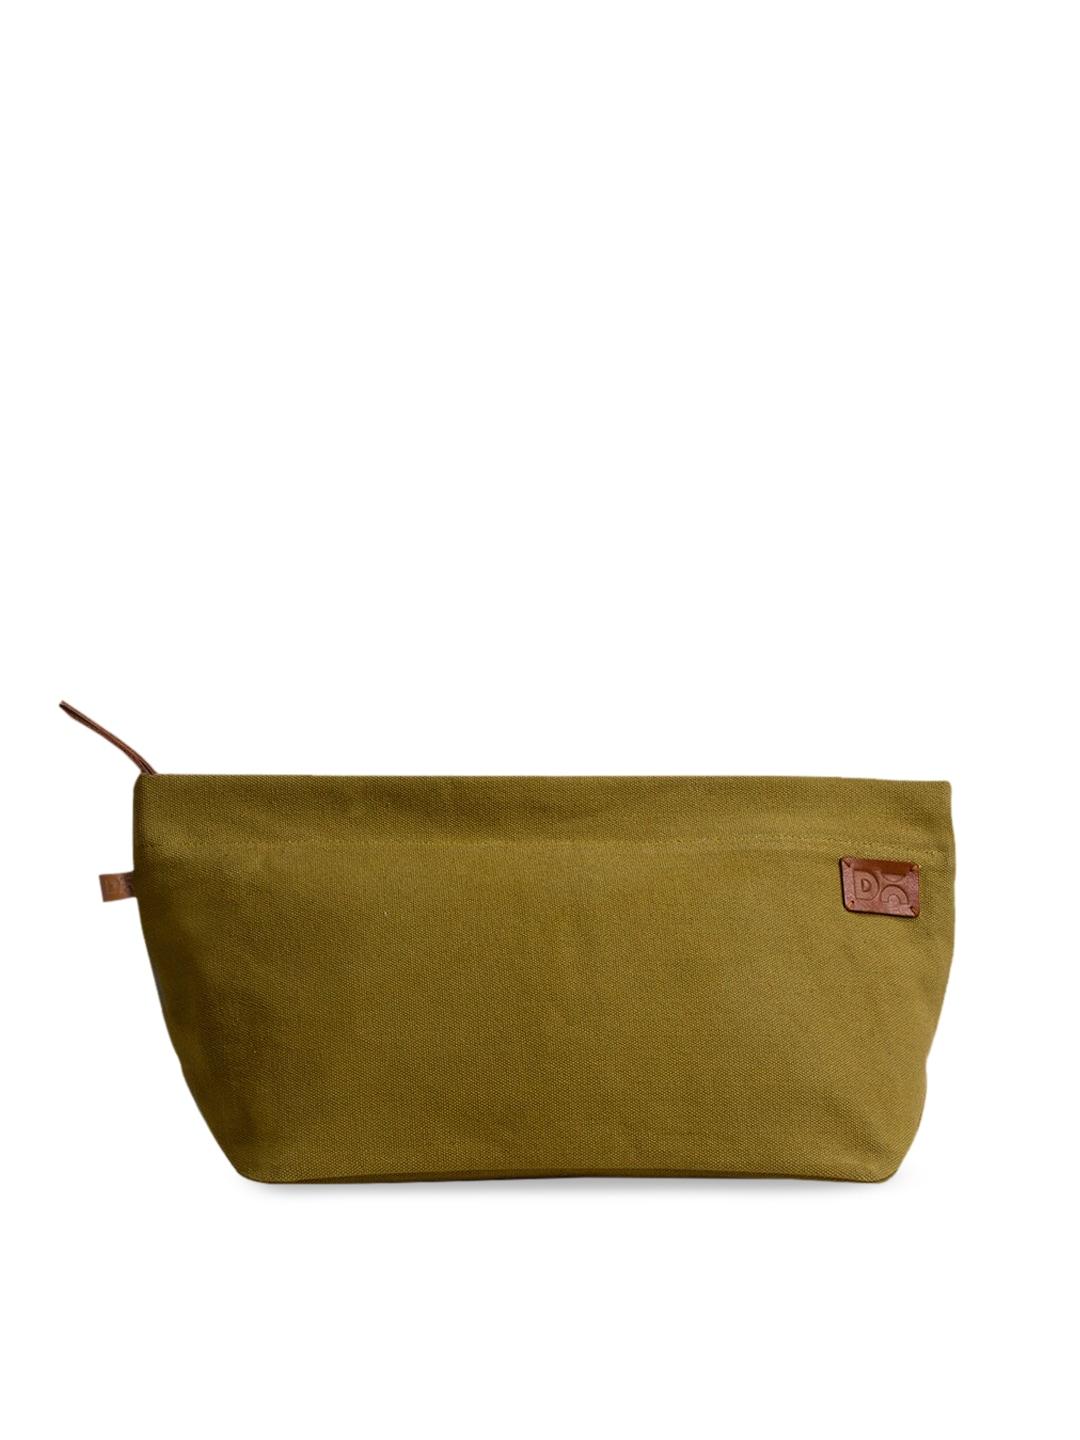 dailyobjects unisex olive green solid pouch